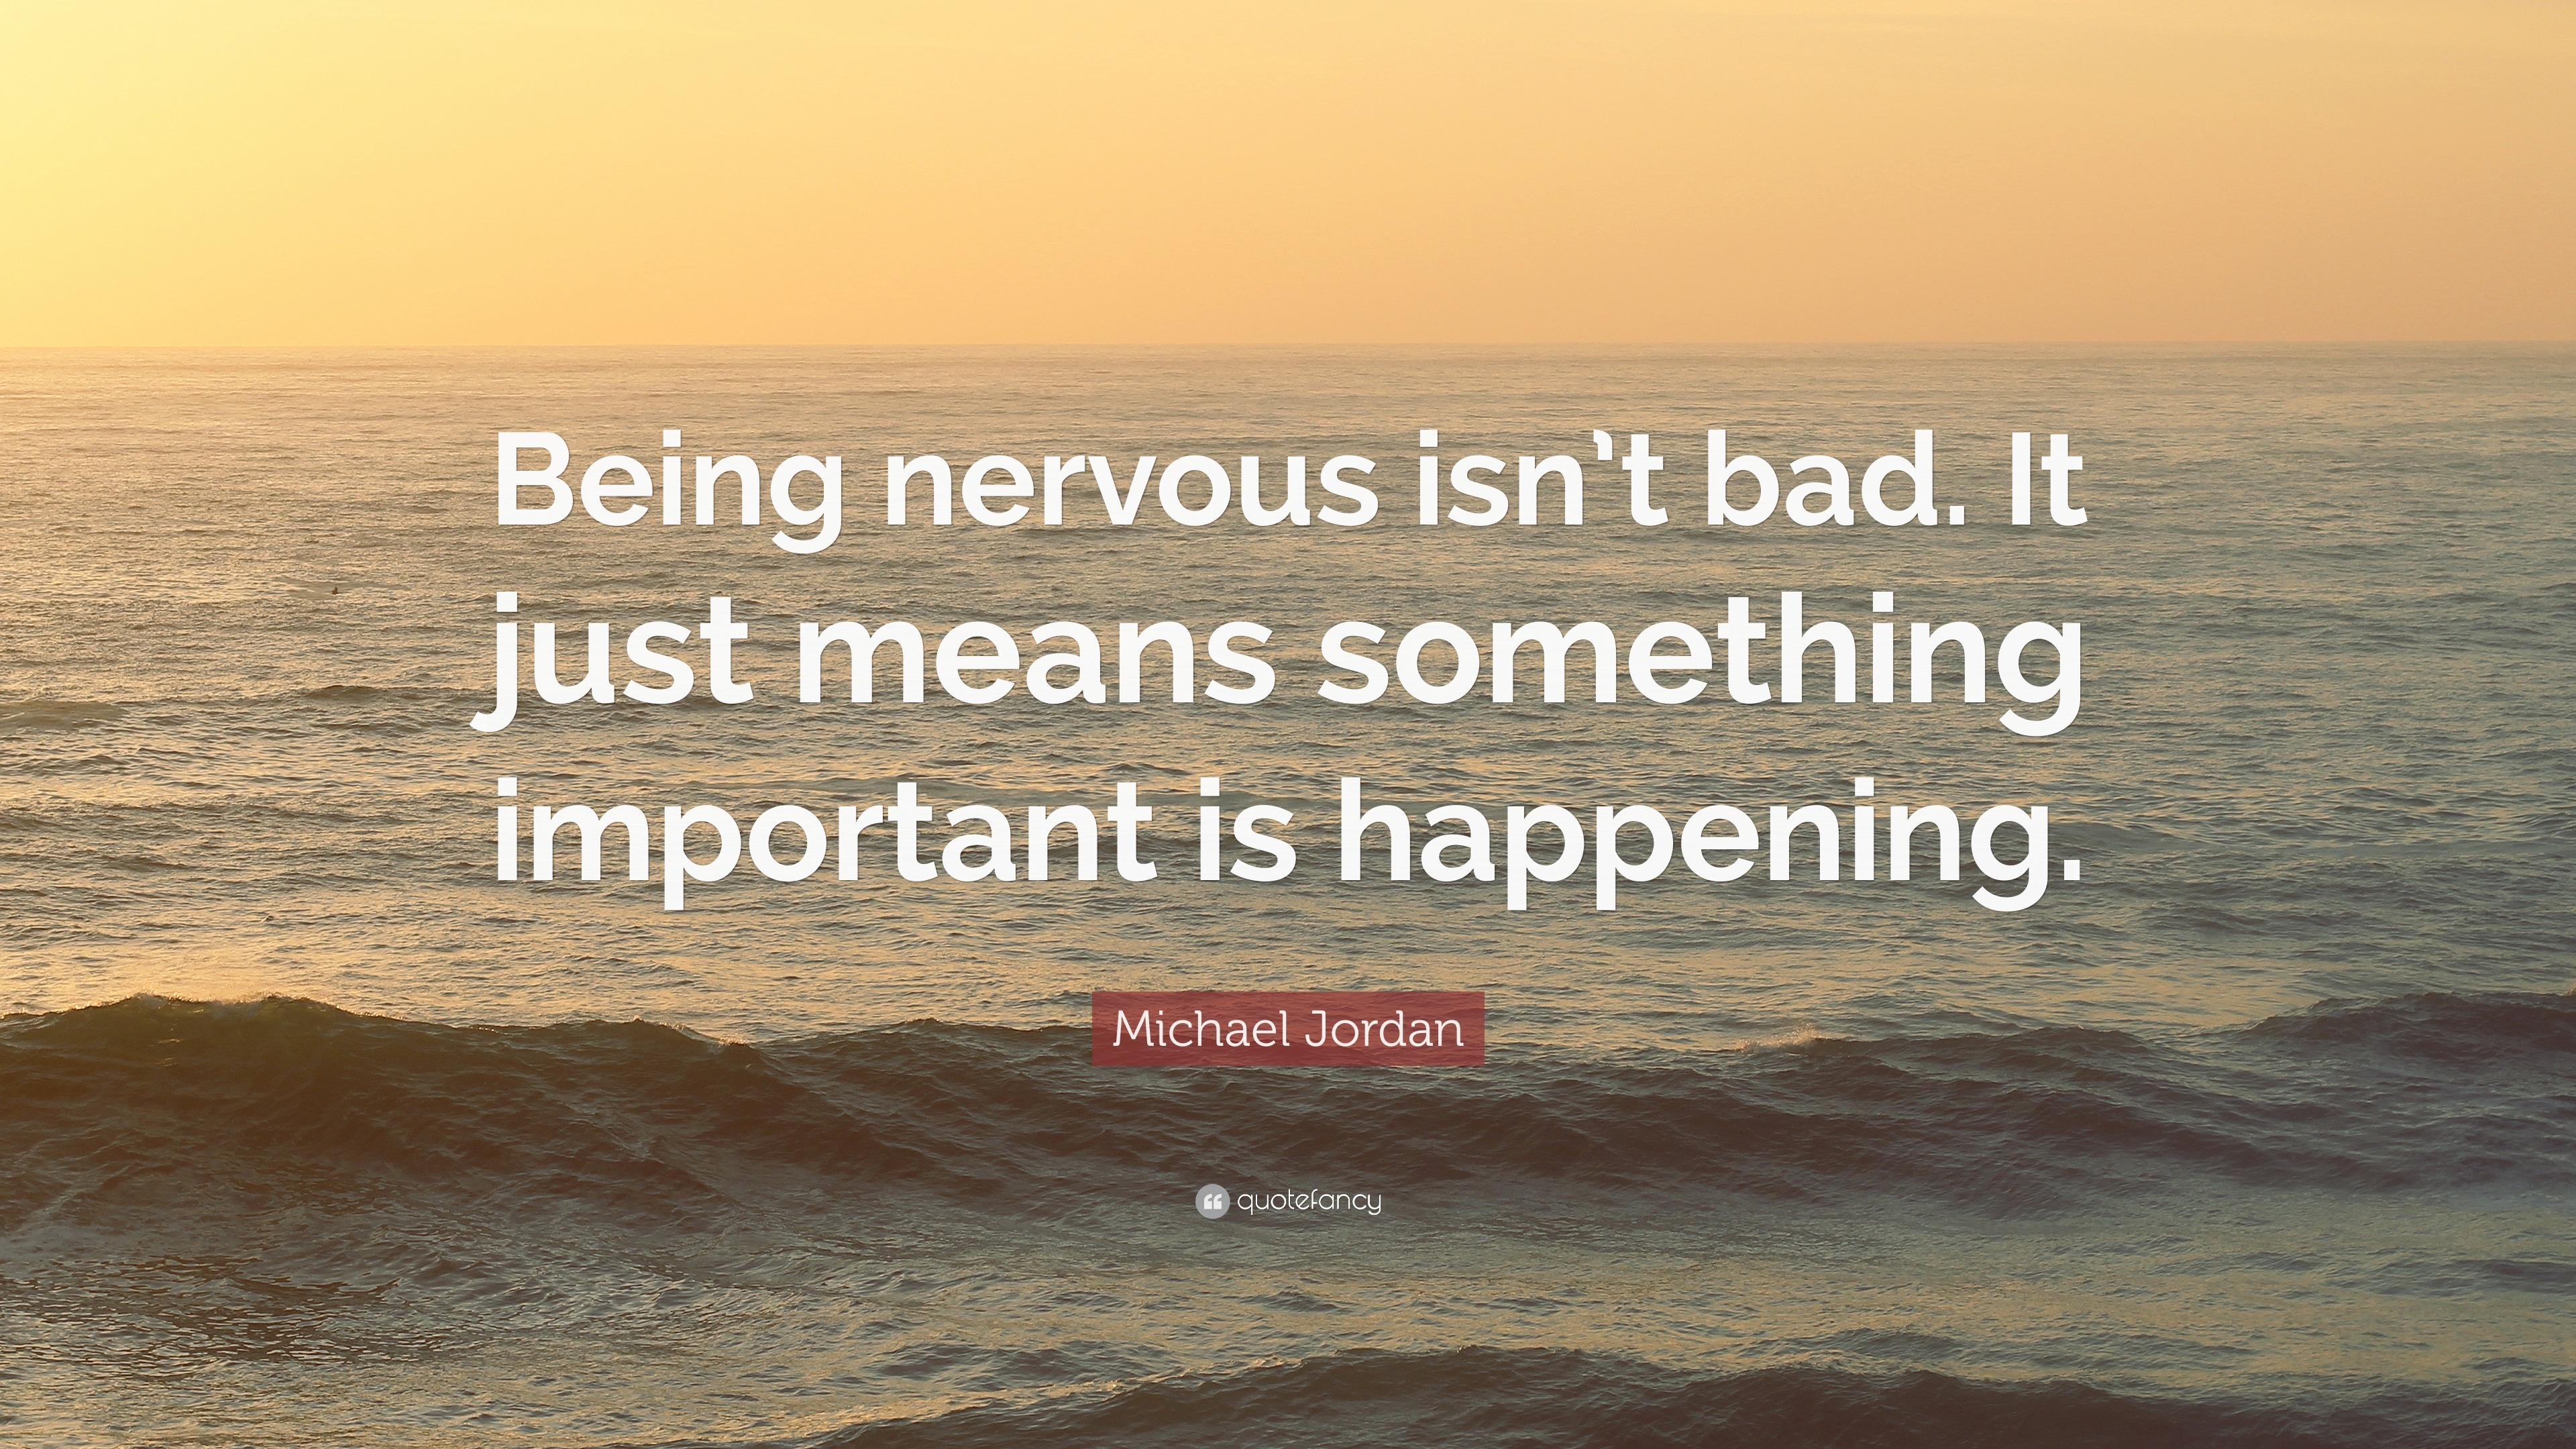 Michael Jordan Quote: “Being nervous isn’t bad. It just means something